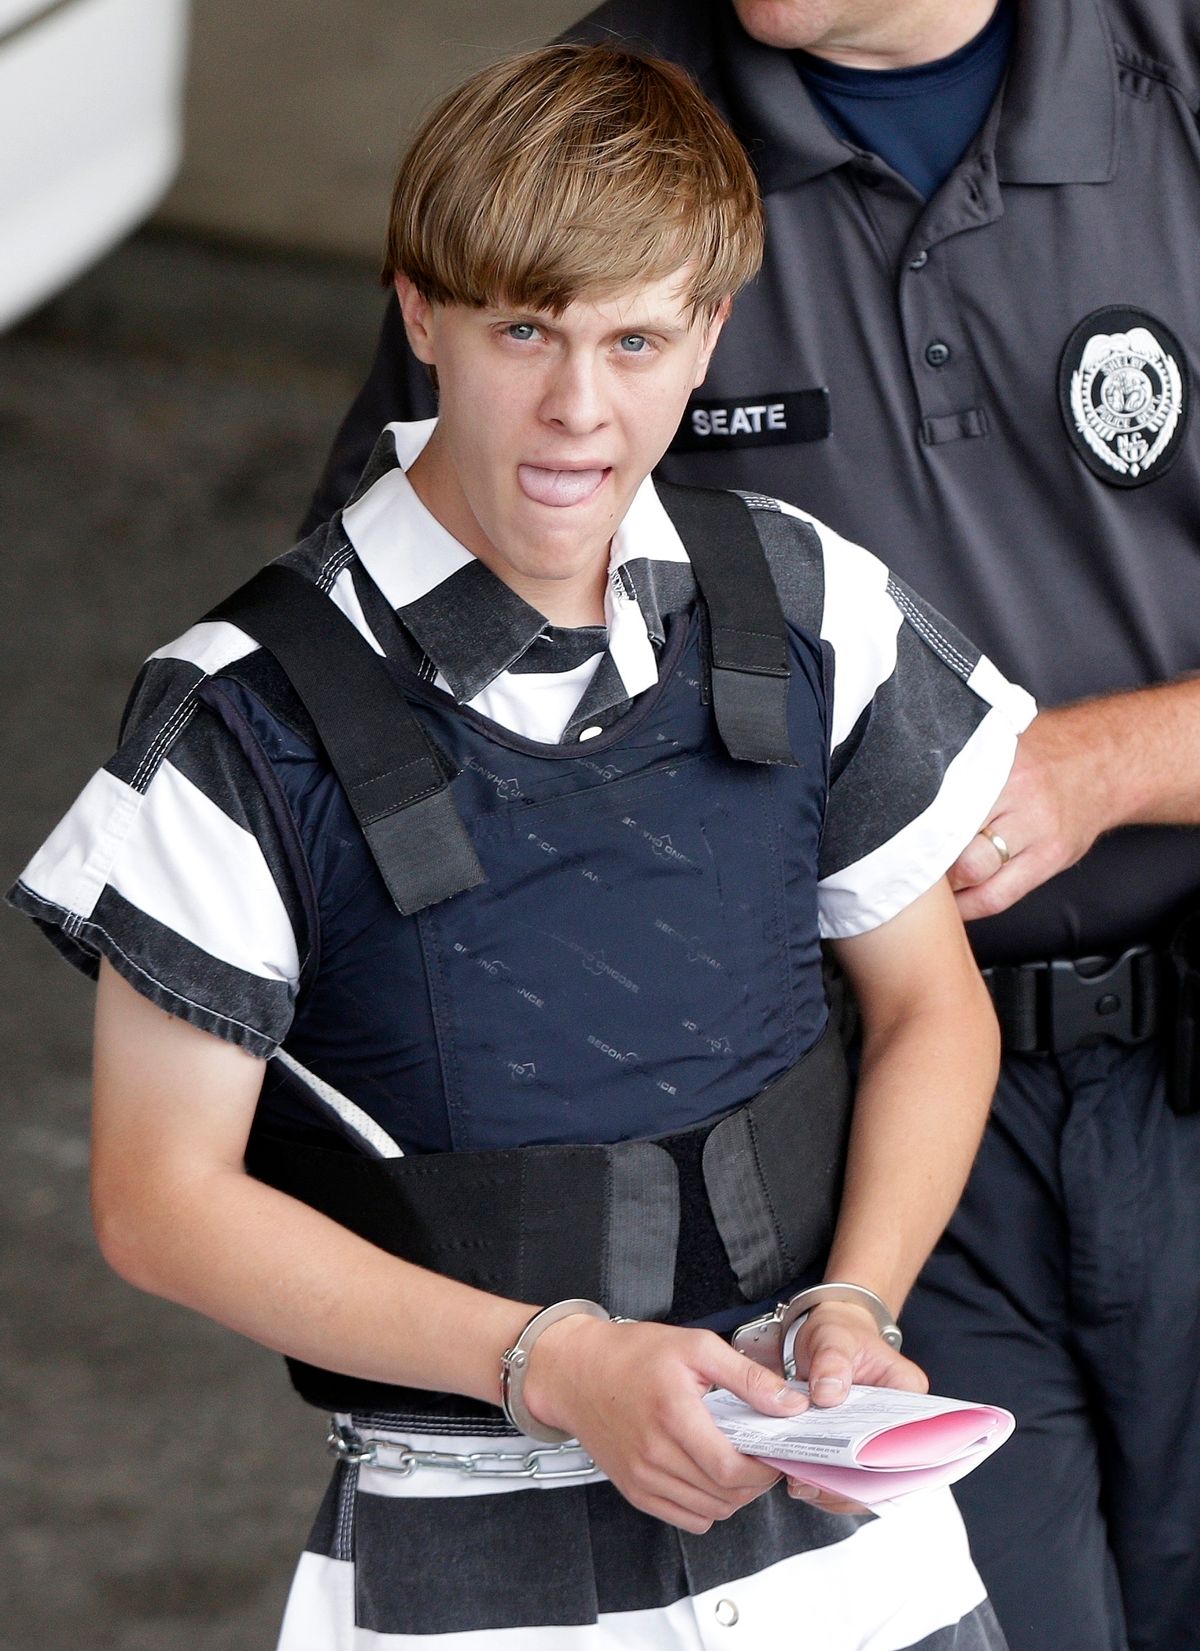 FILE - In this Thursday, June 18, 2015, file photo, Charleston, S.C., shooting suspect Dylann Roof is escorted from the Cleveland County Courthouse in Shelby, N.C. T (AP)